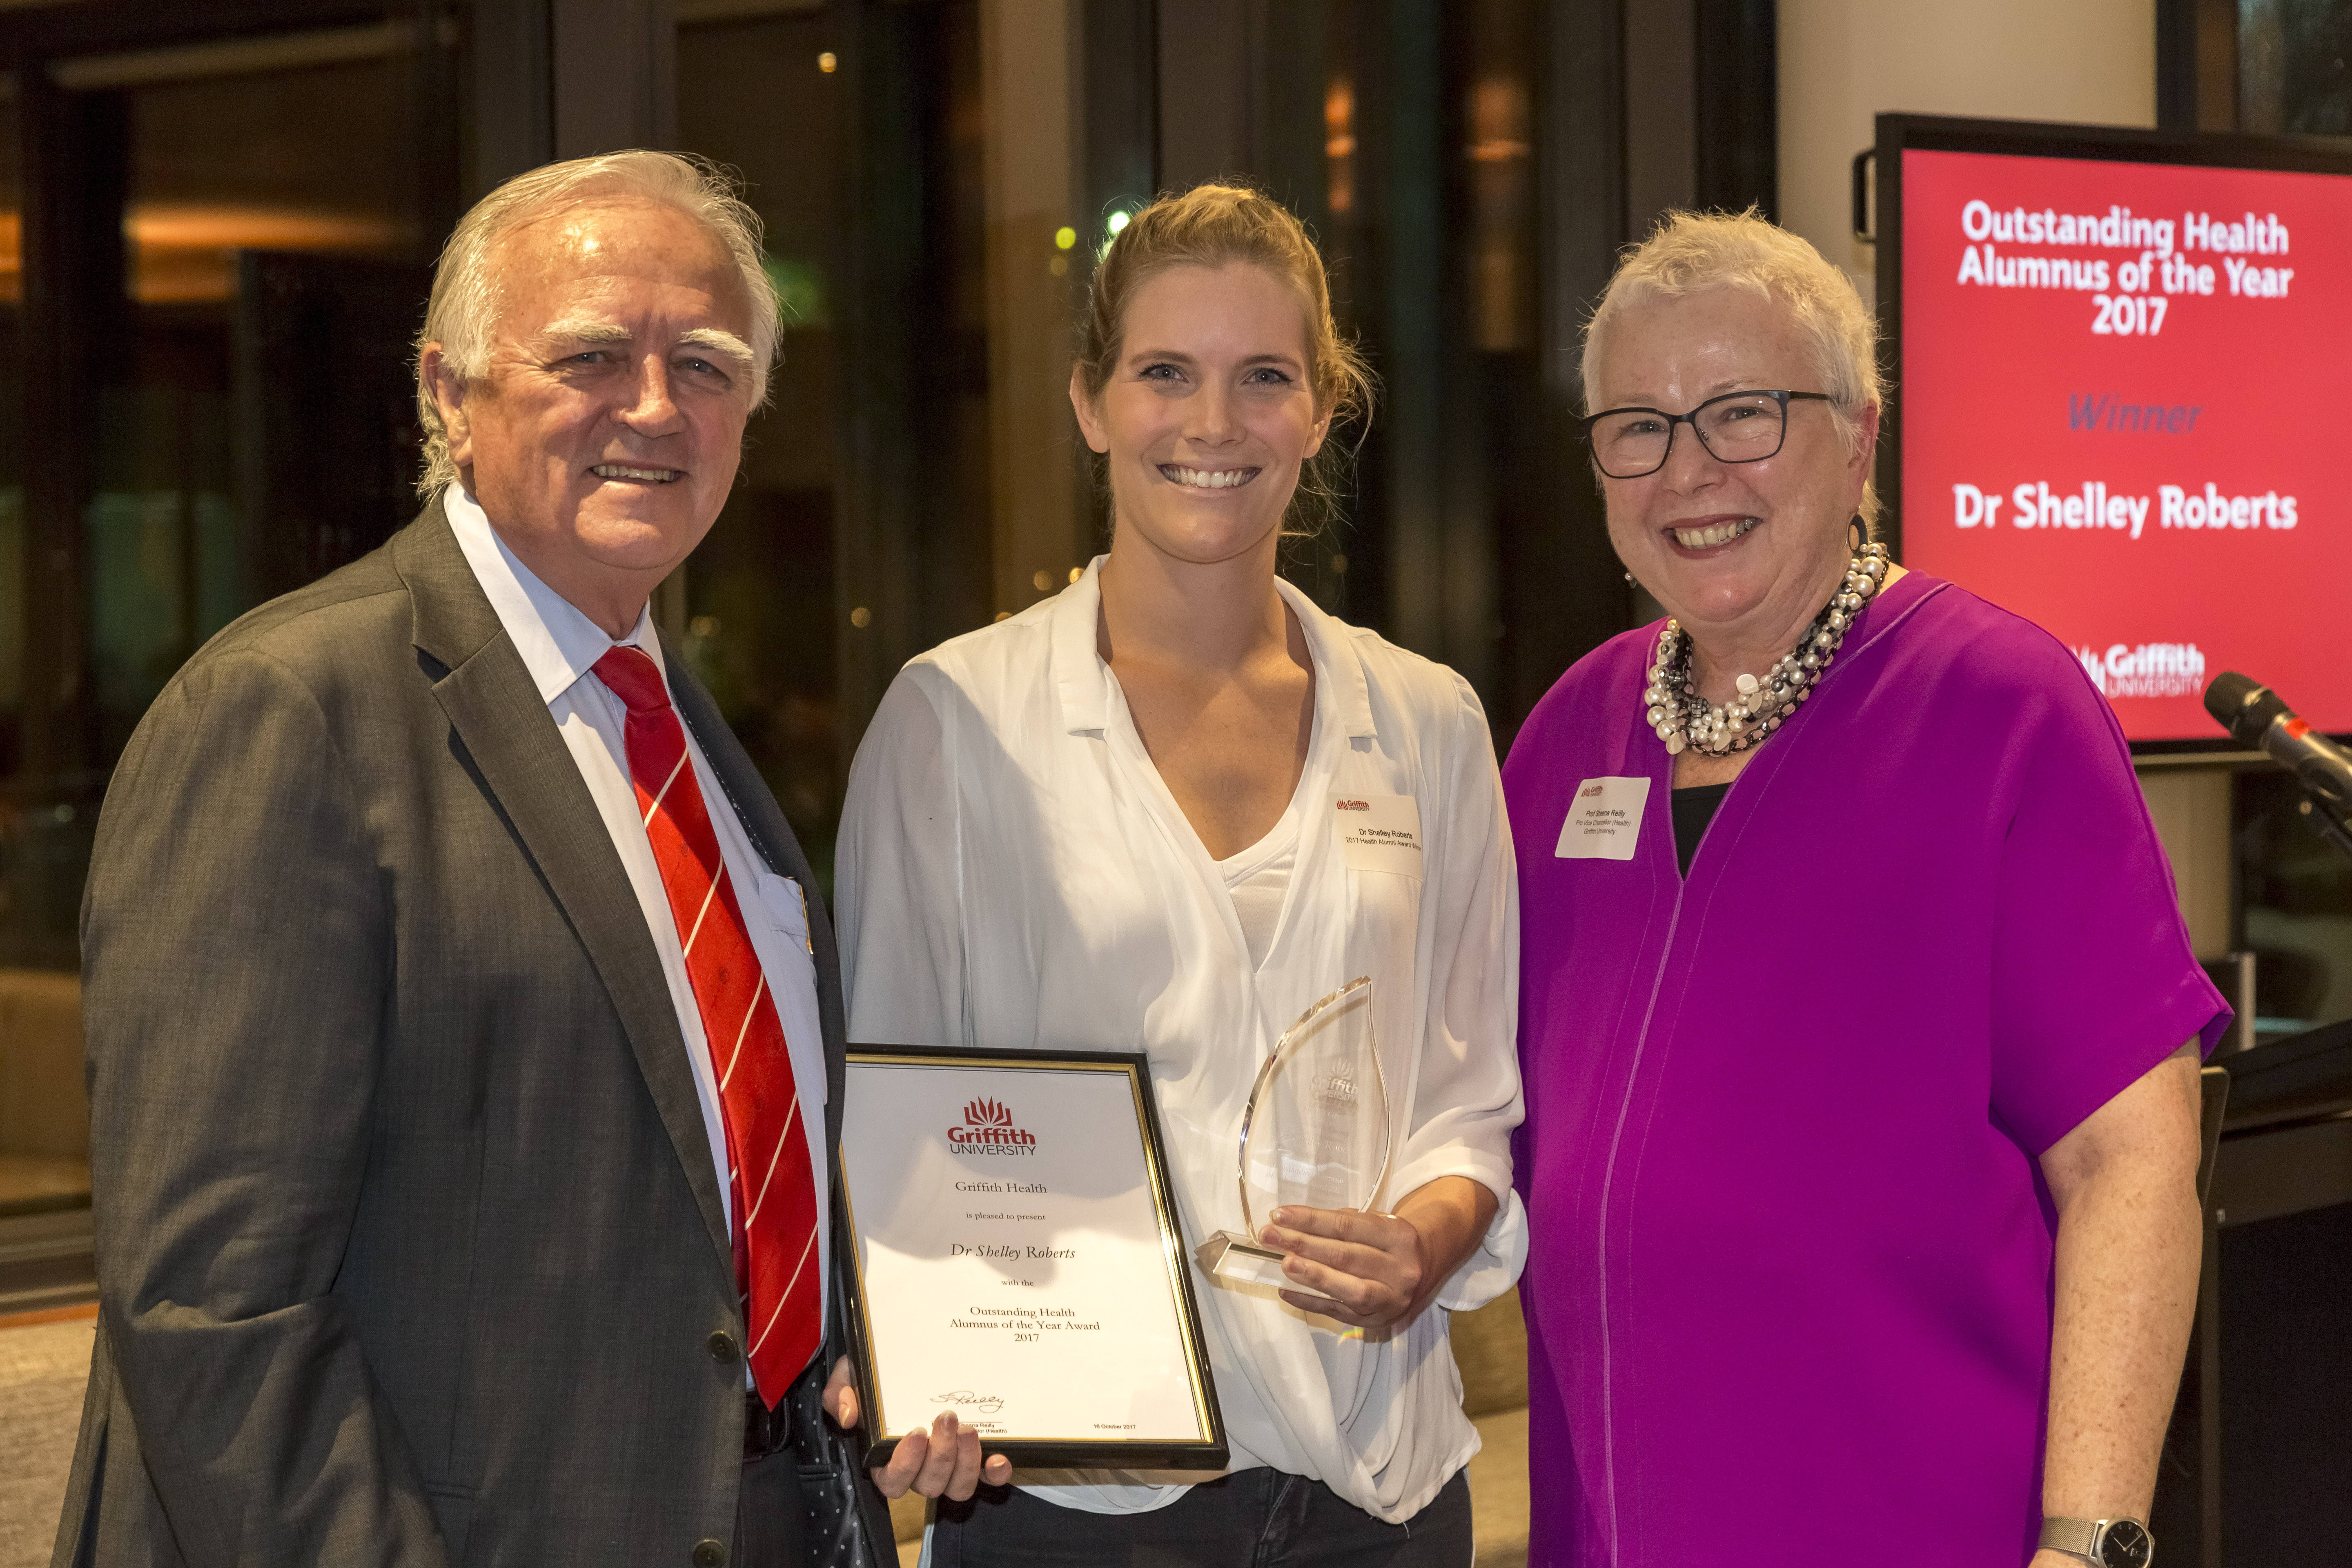 Three in a row: Griffith University Chancellor, Mr Henry Smerdon AM, with Outstanding Overall Health Alumnus of the Year, Dr Shelley Roberts, and Pro Vice Chancellor (Health) Professor Sheena Reilly